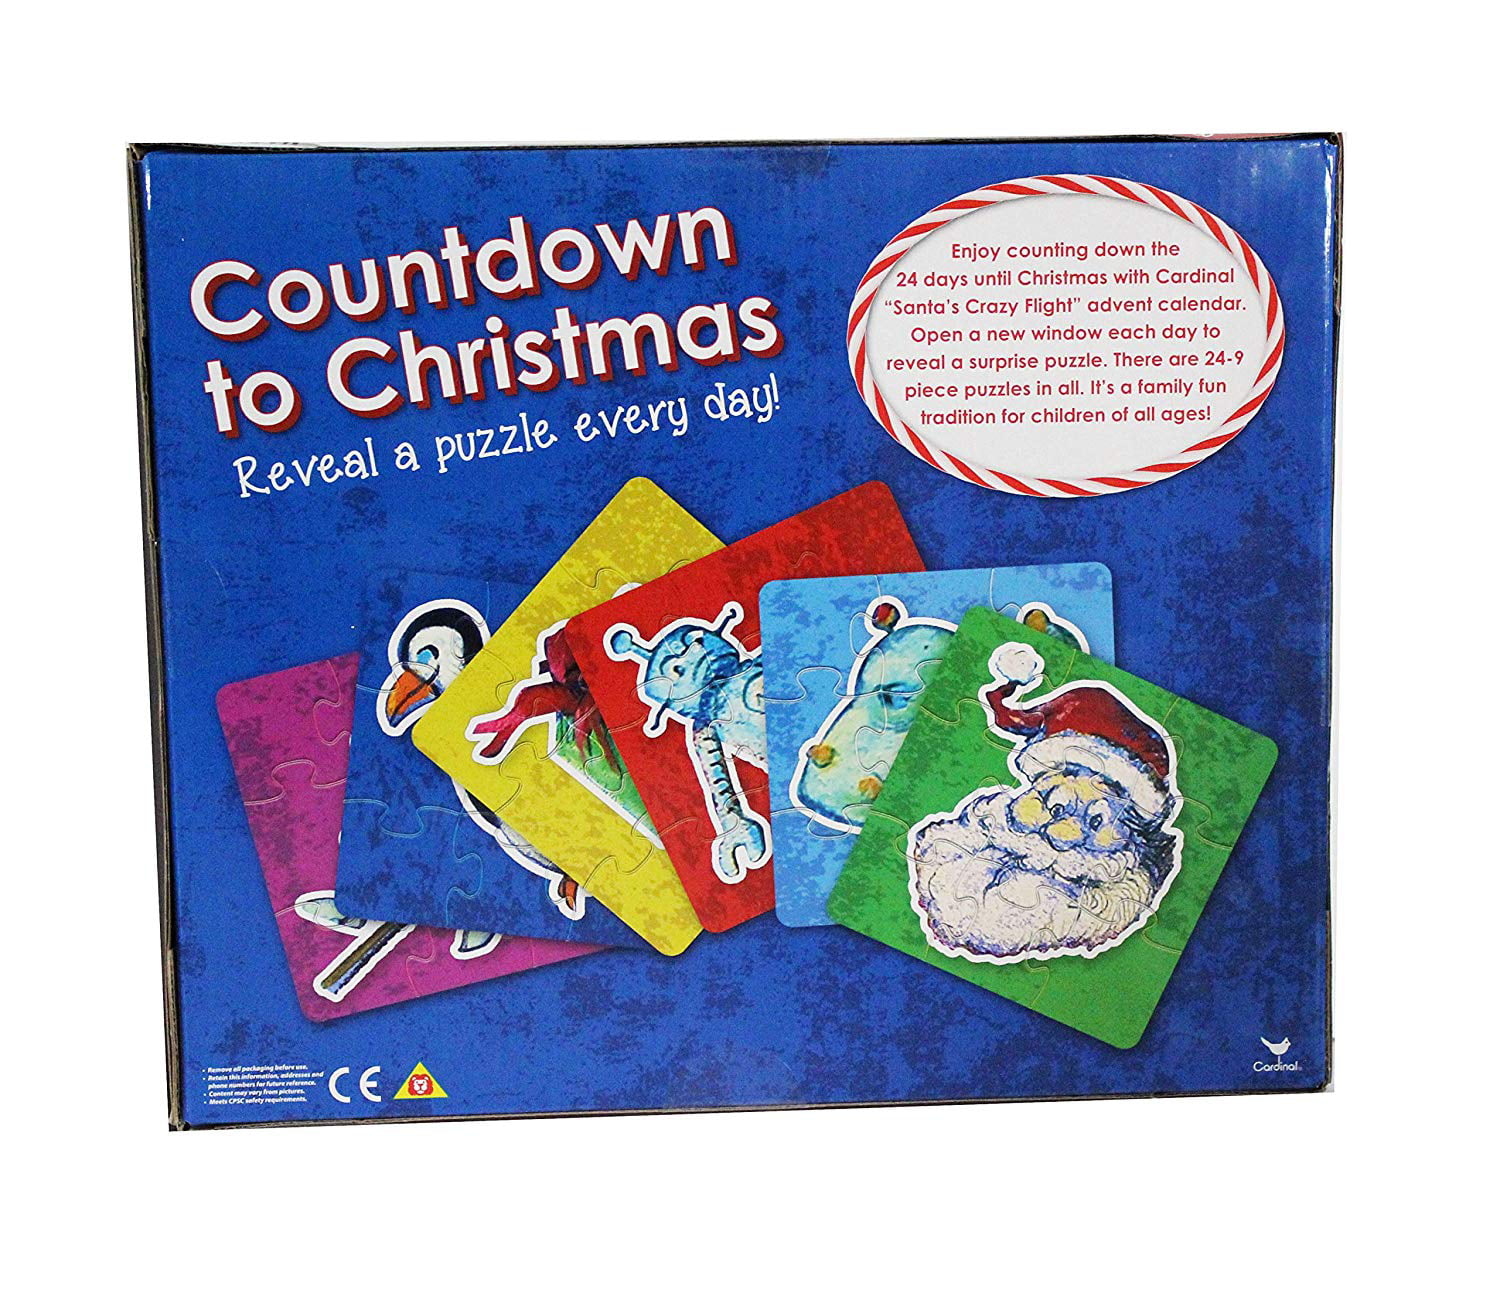 24 9-piece Puzzles. Countdown to Christmas Puzzles Advent Calendar! 